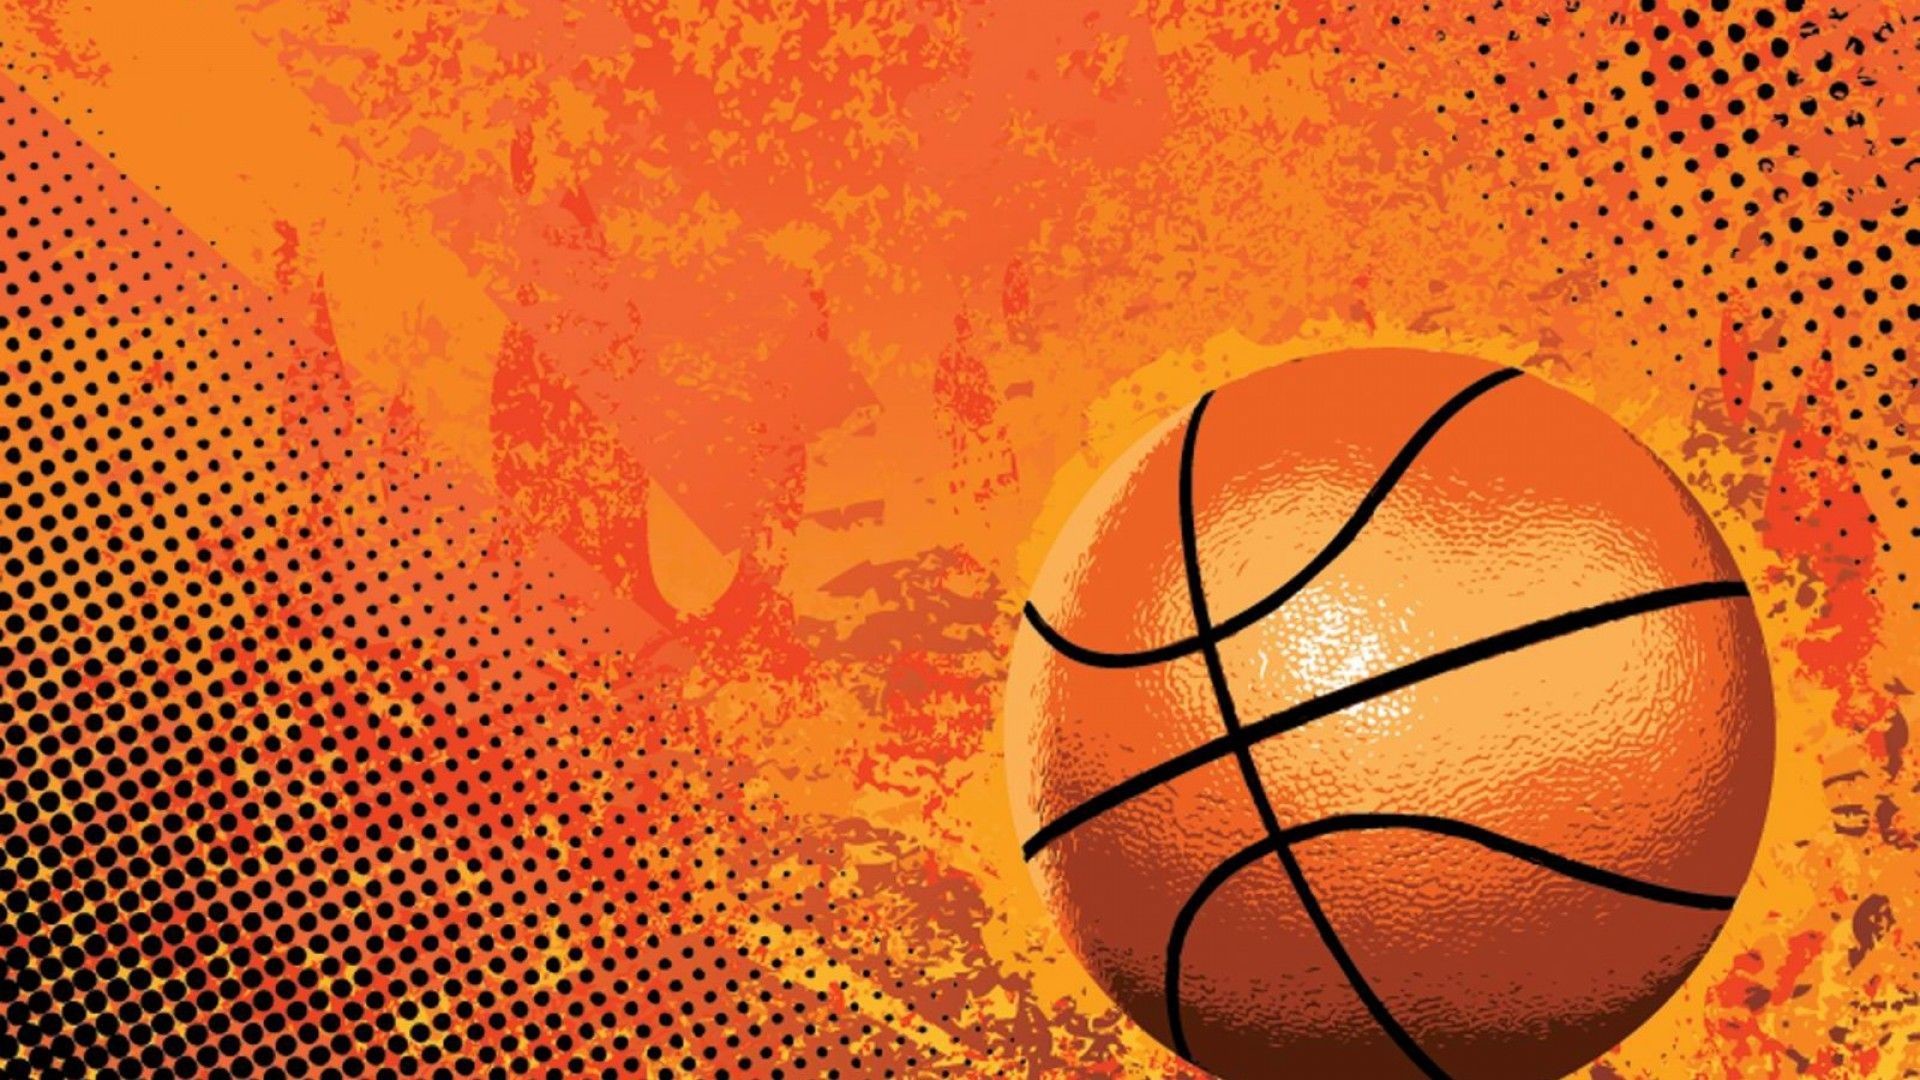 1920x1080 Basketball Images Wallpapers (43 Wallpapers)